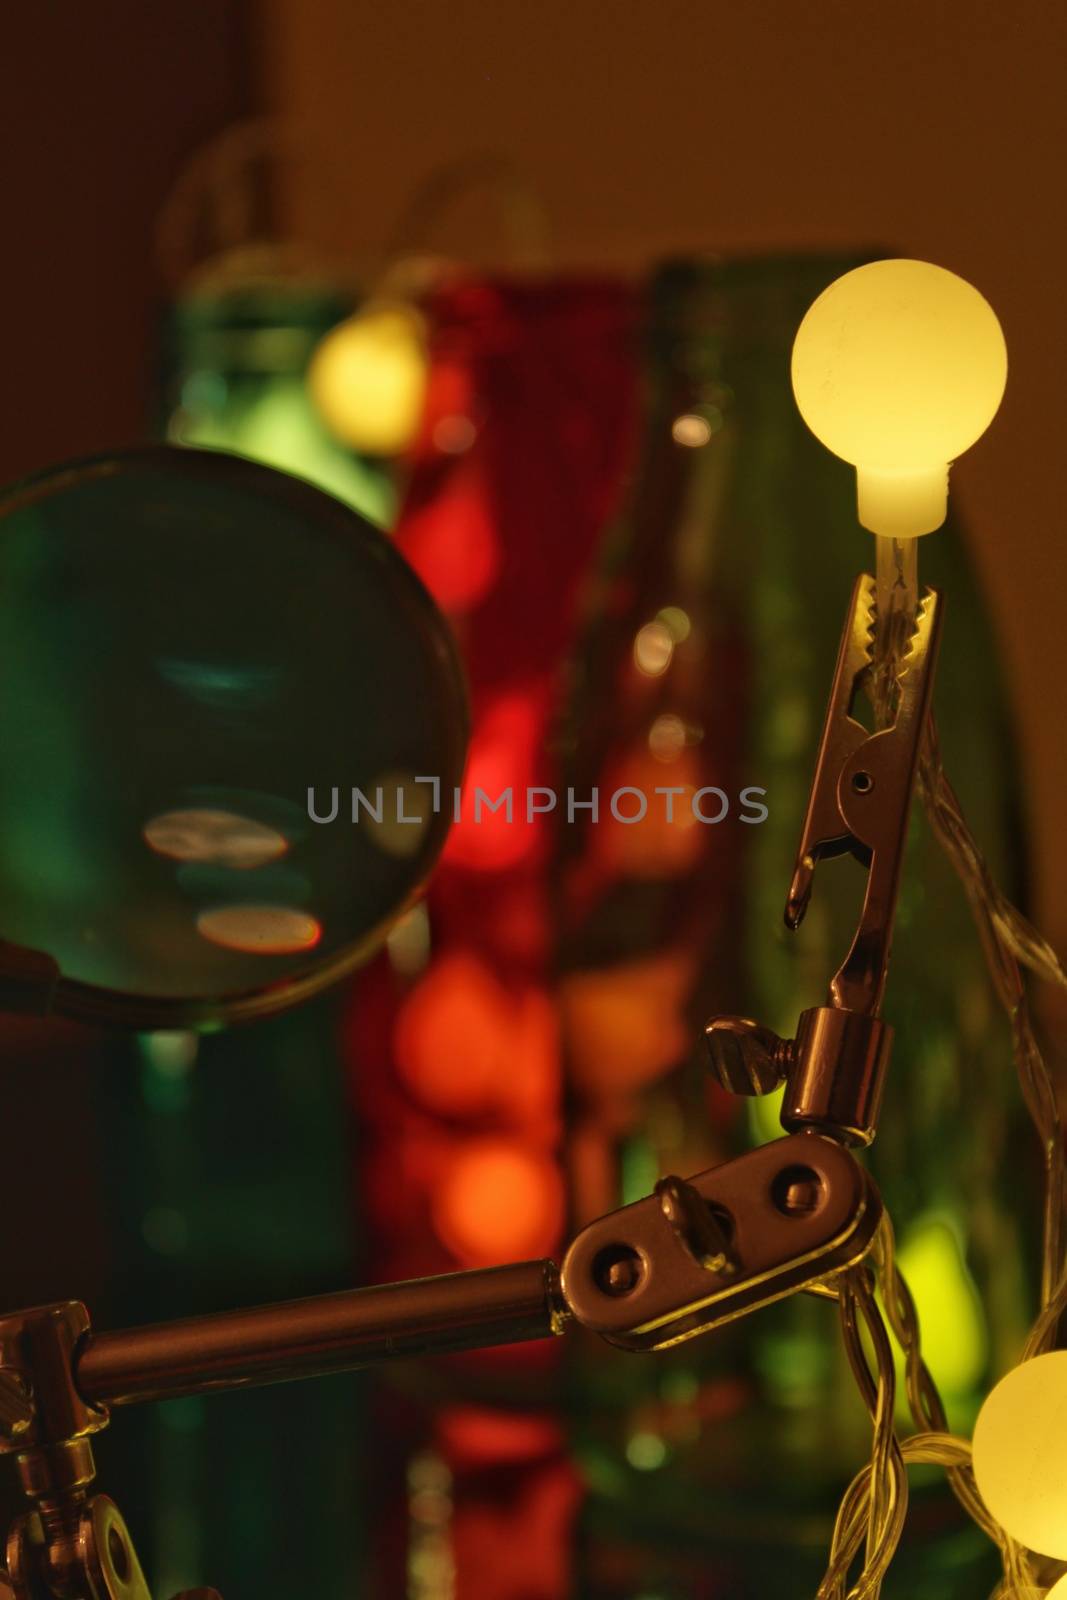 Colorful lights and glass by soniabonet